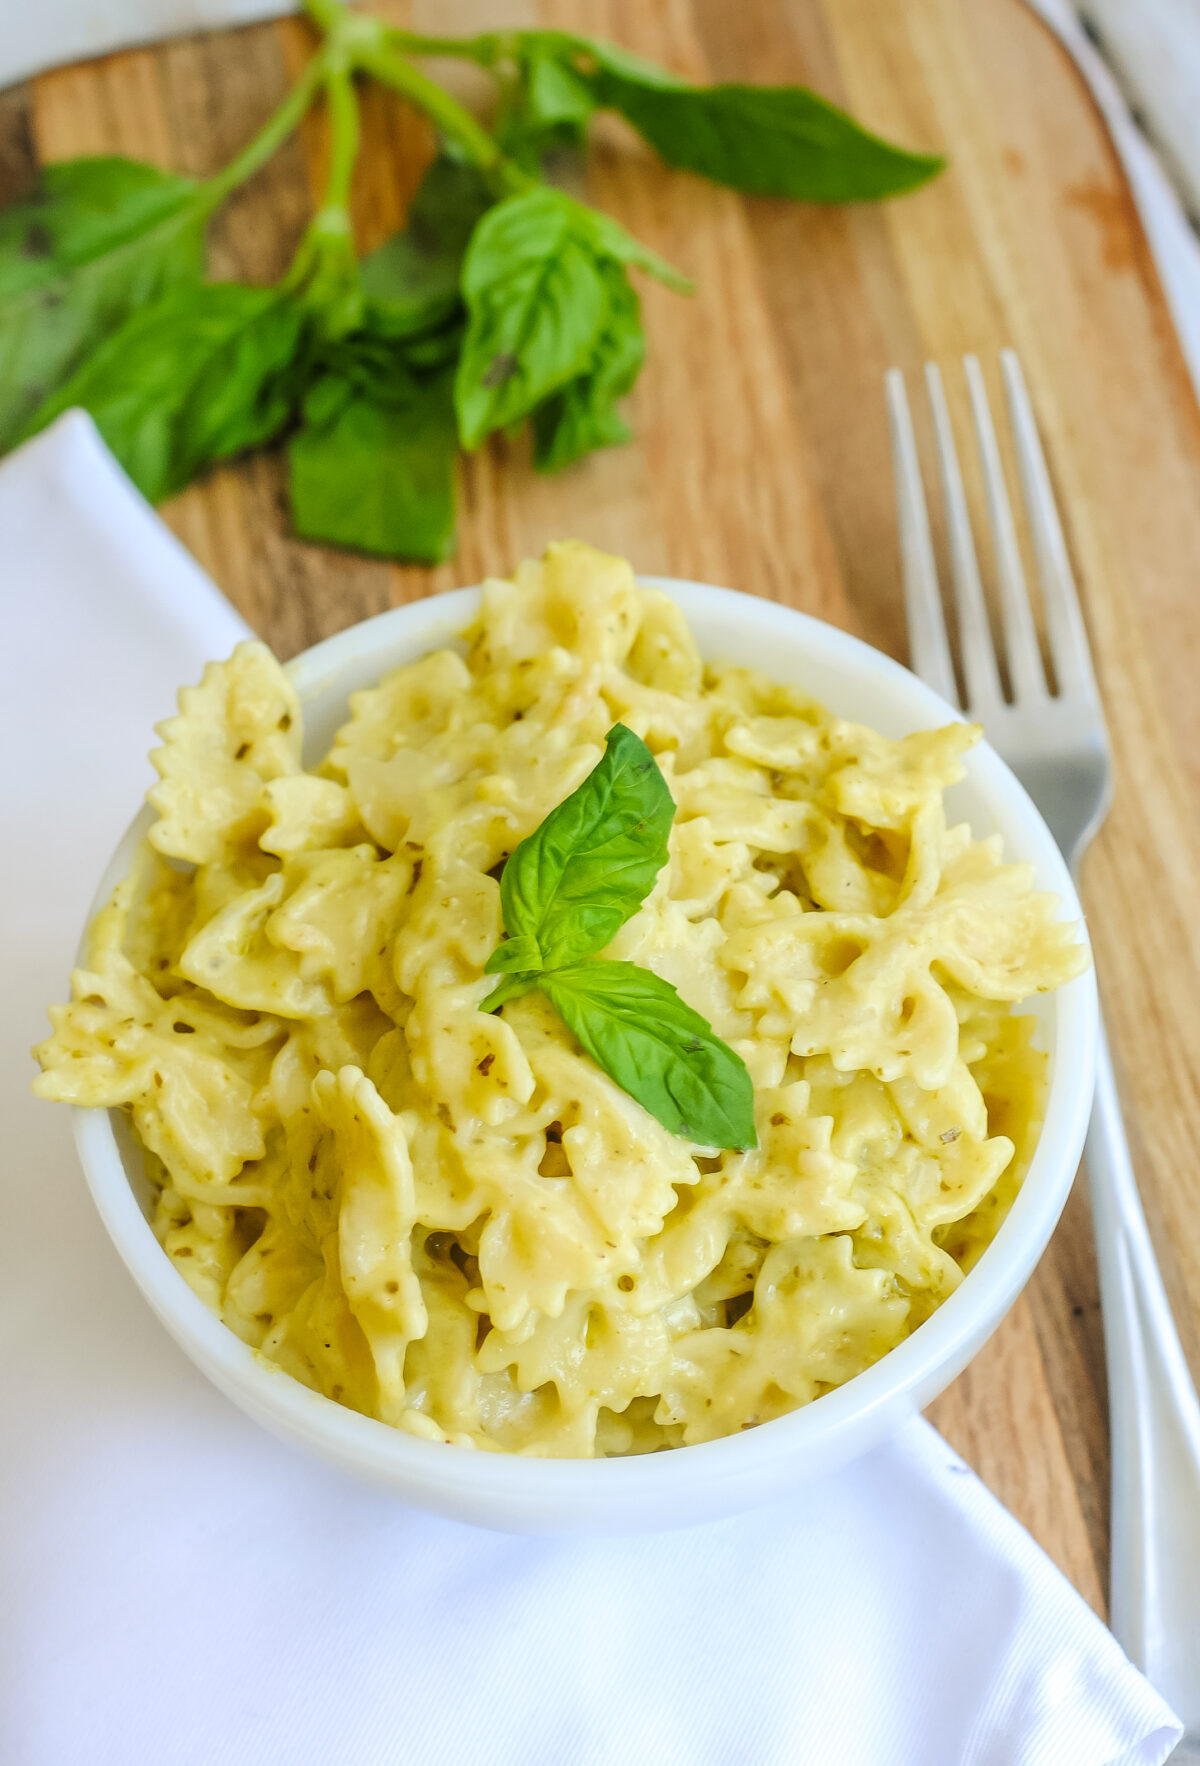 This stovetop pesto mac and cheese recipe is quick, simple, creamy, and so flavorful! A perfect weeknight meal filled with cheese and pesto.